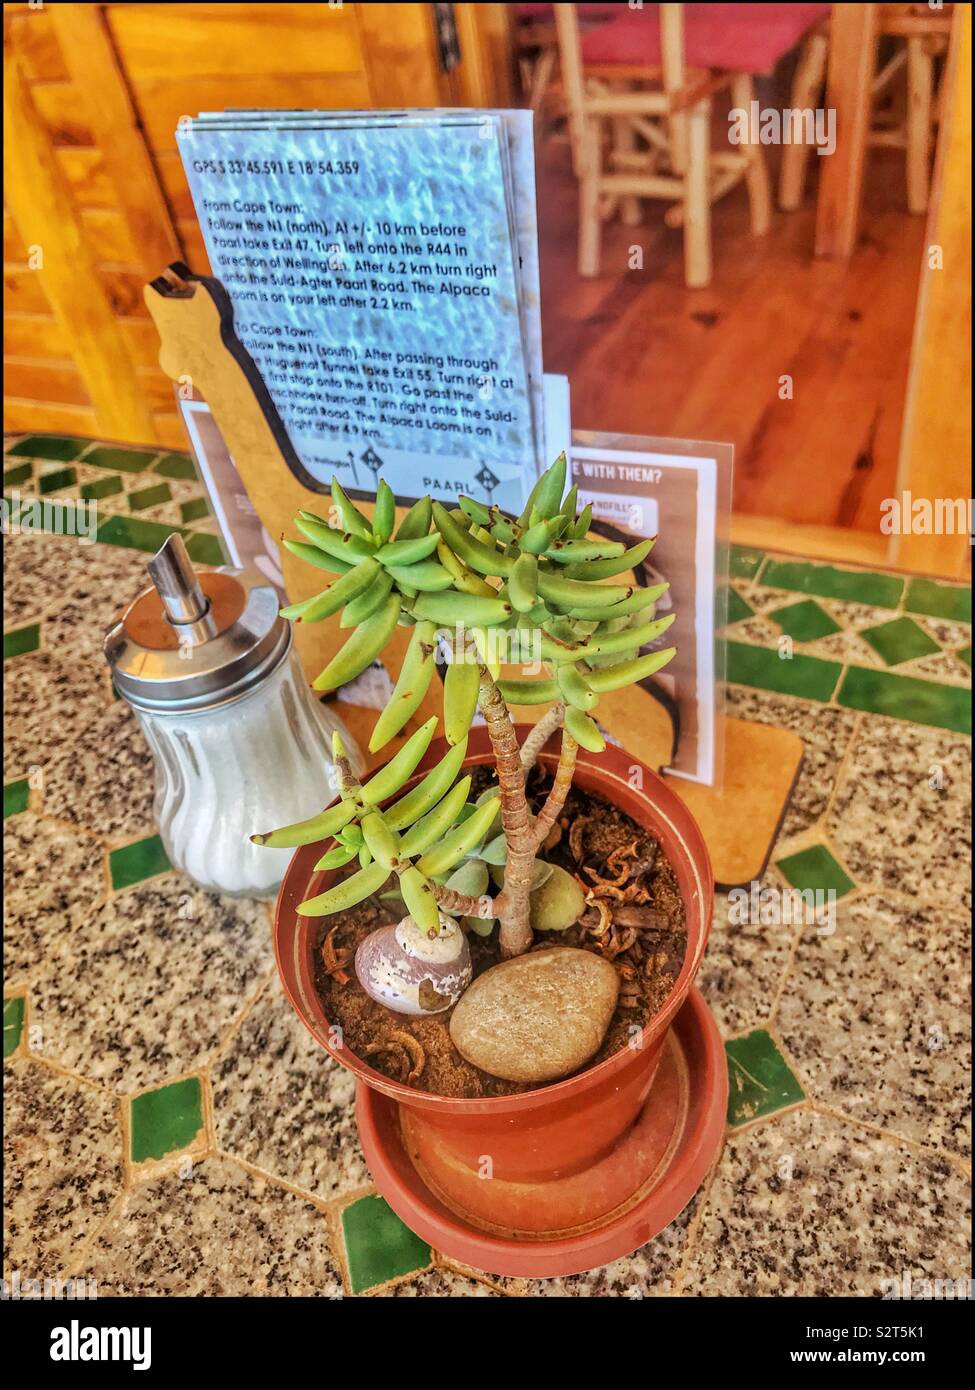 Succulent on restaurant table at the Alpaca Loom, Paarl, South Africa. Stock Photo